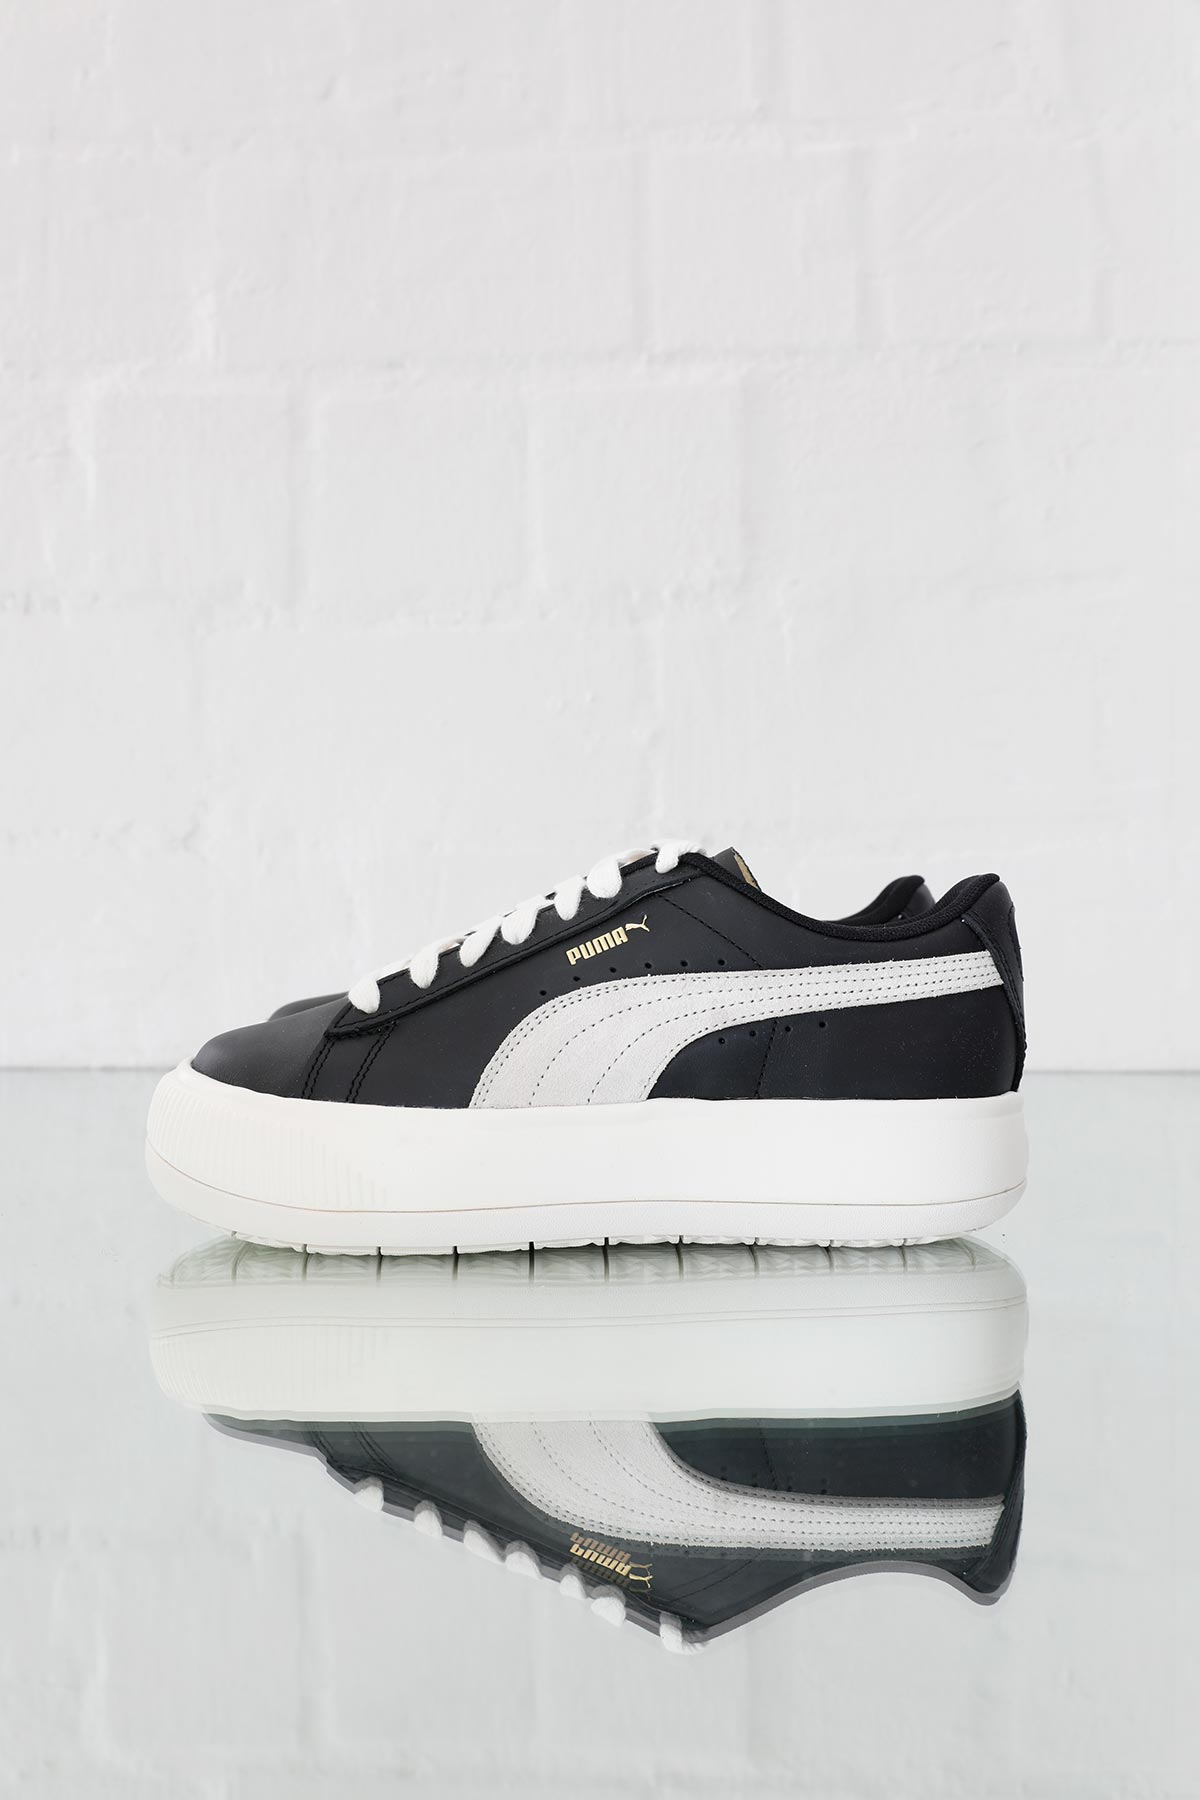 Suede Mayú Black Marshmallow Trainers